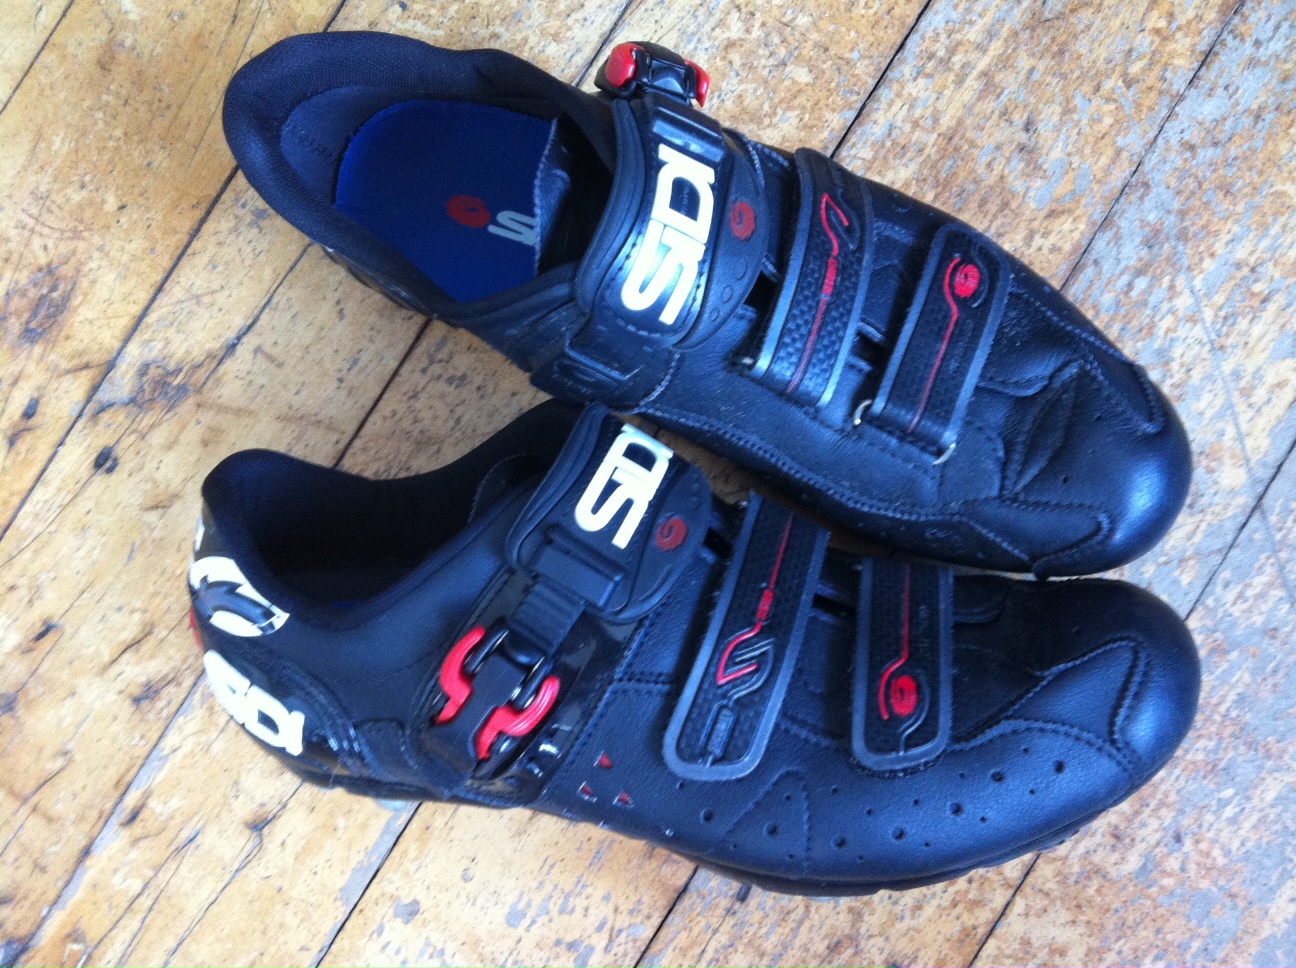 stylish clipless shoes